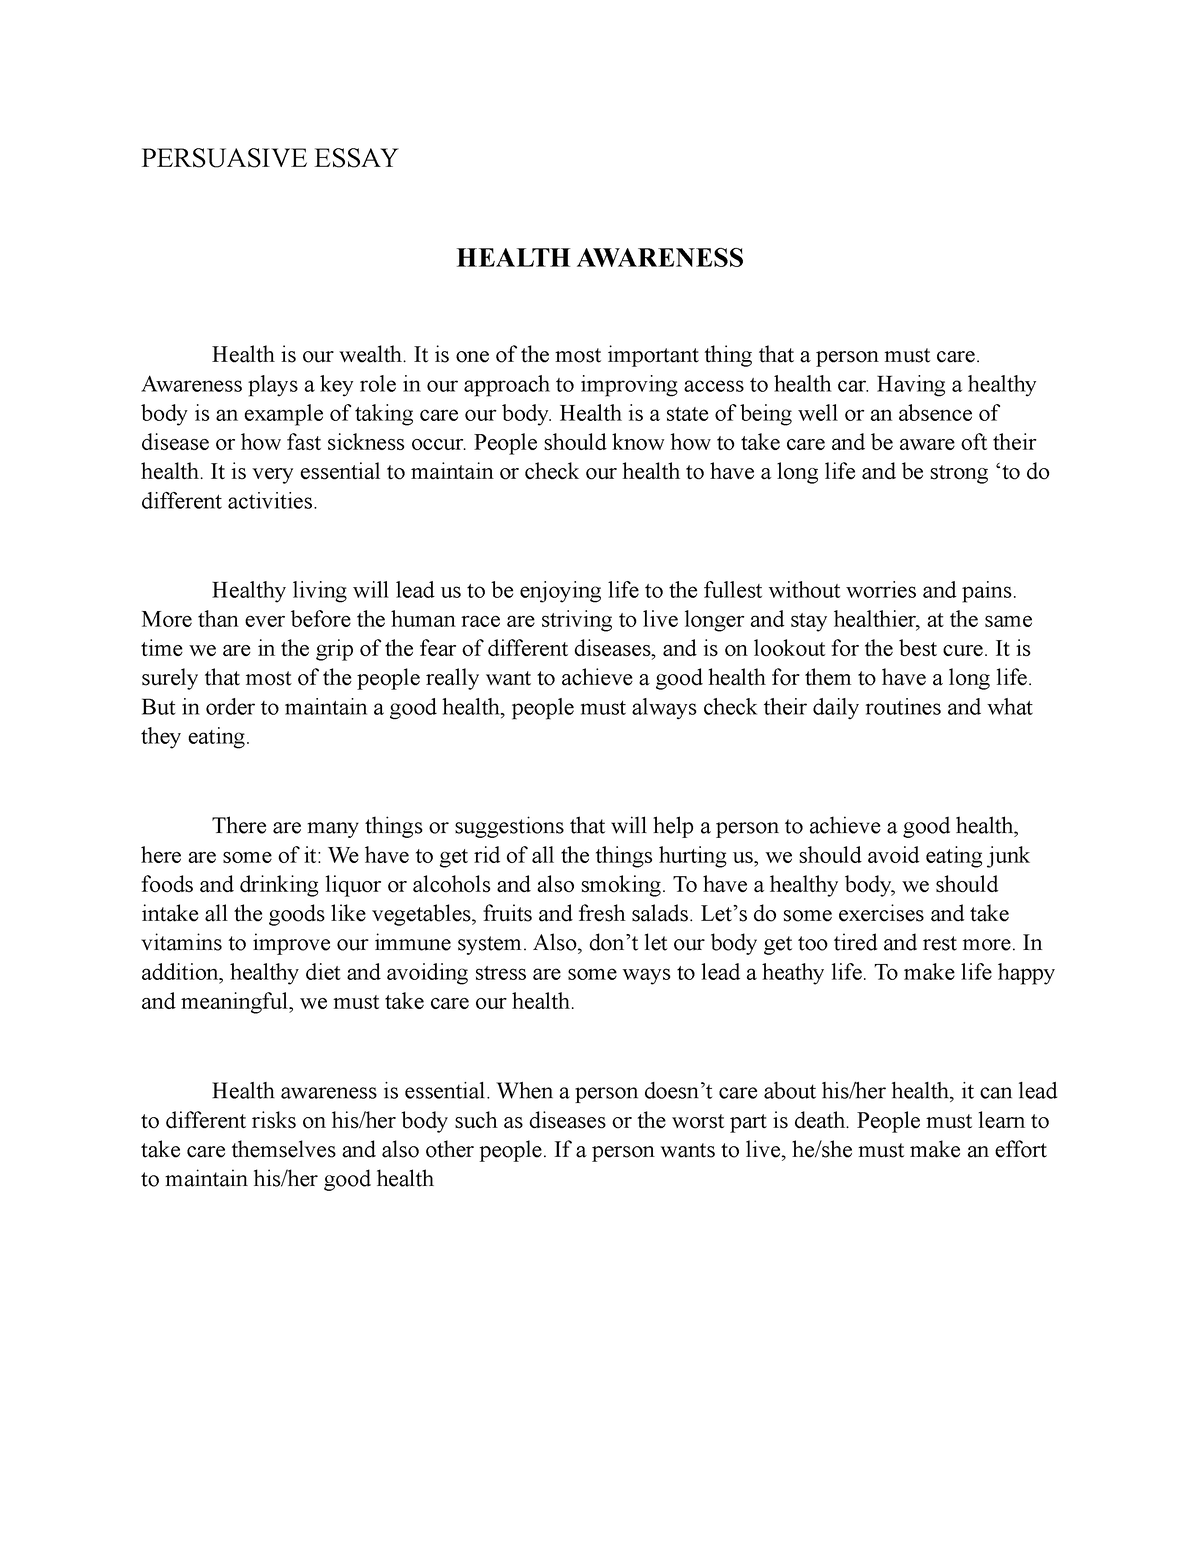 persuasive essay about health awareness example